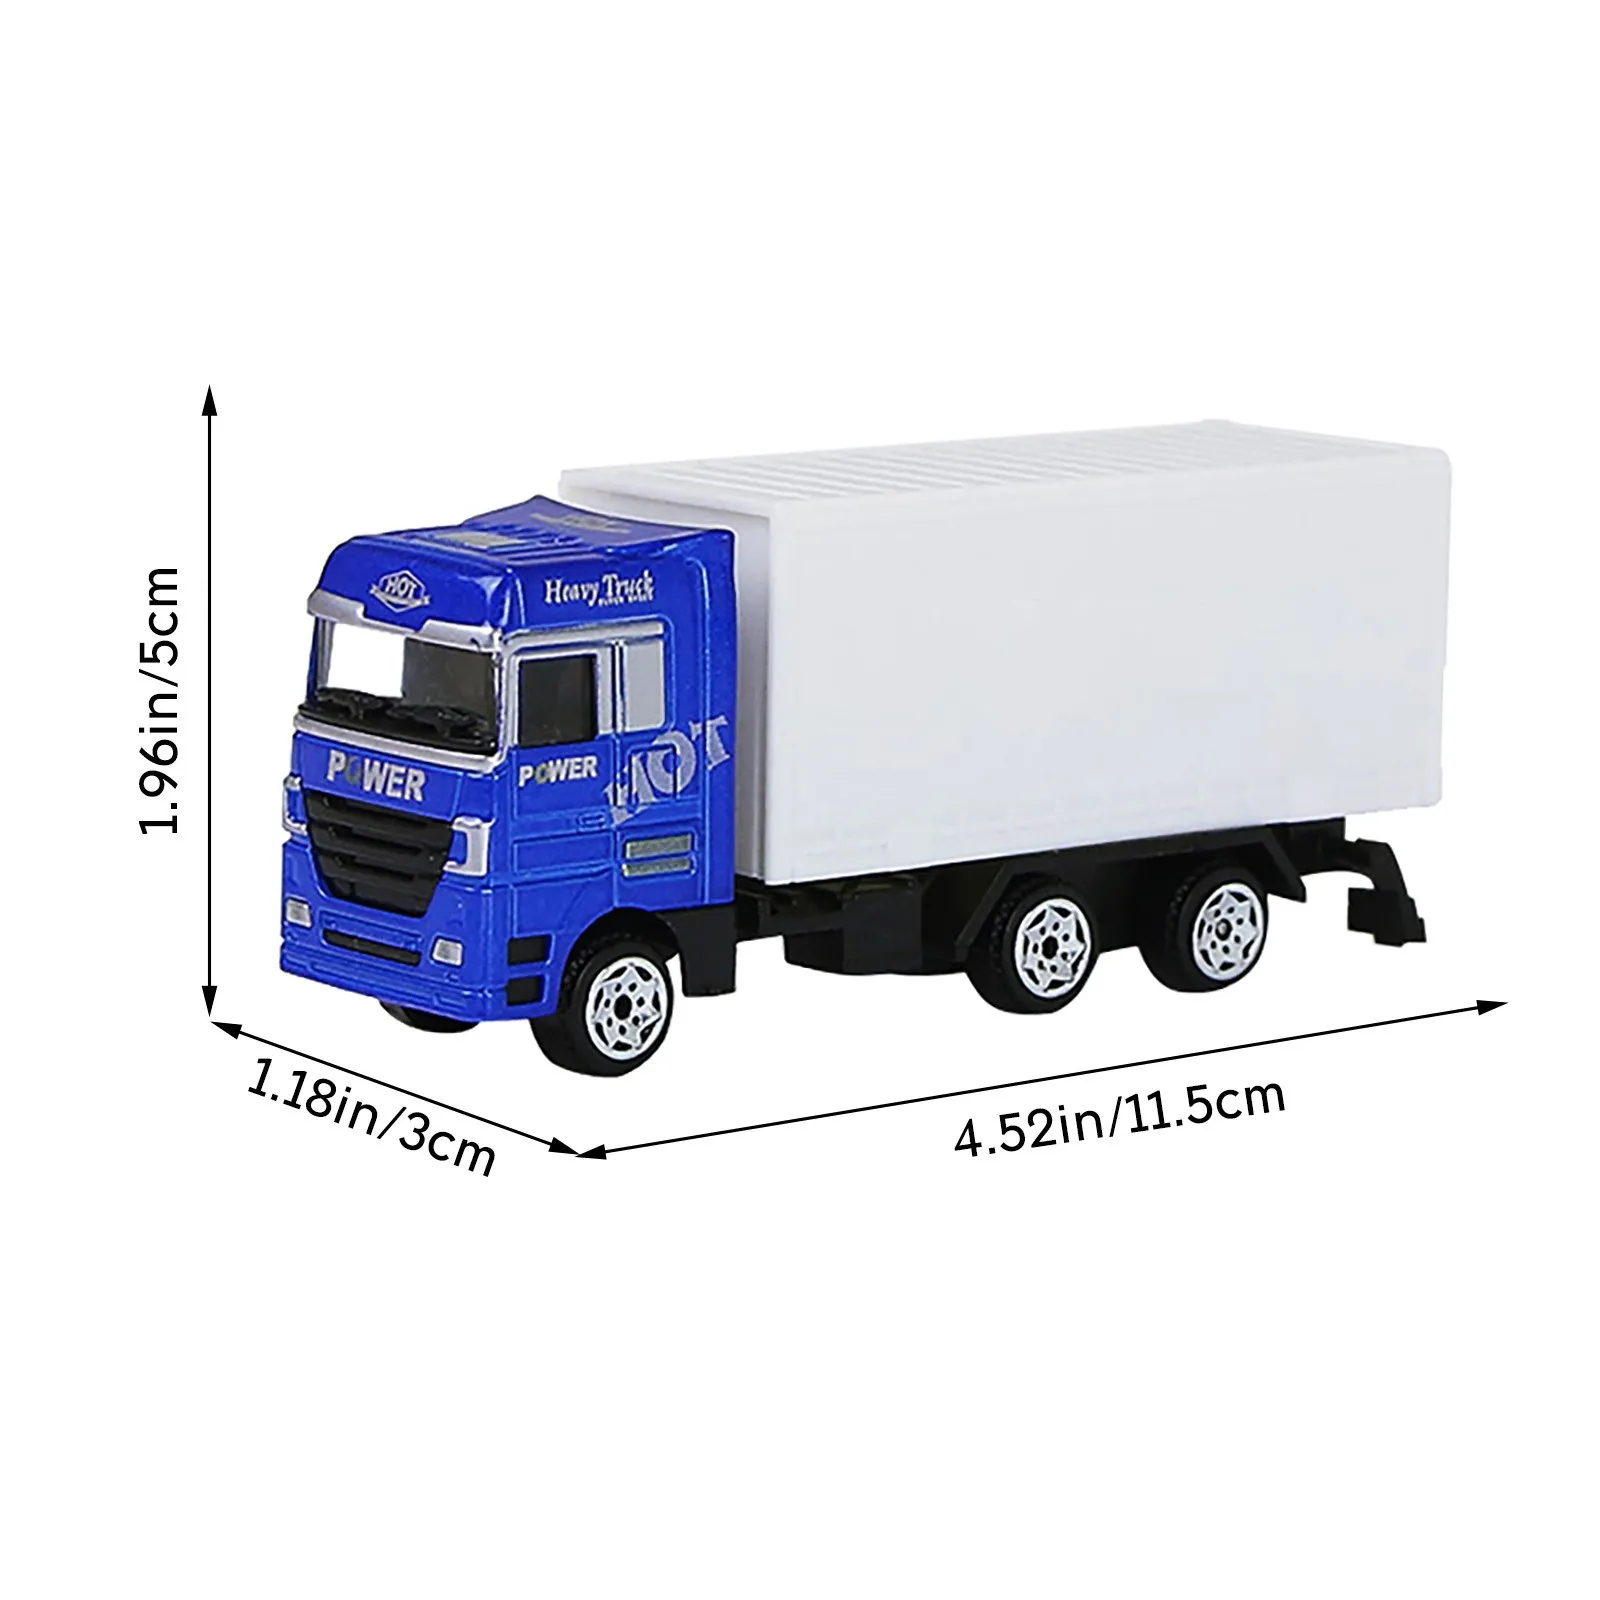 Simulering Engineering Truck Lifter Transport Truck Model Diecasting Car Childrens Toy Gift Mini Pull Back Alloy Car Vehicle286K5923460